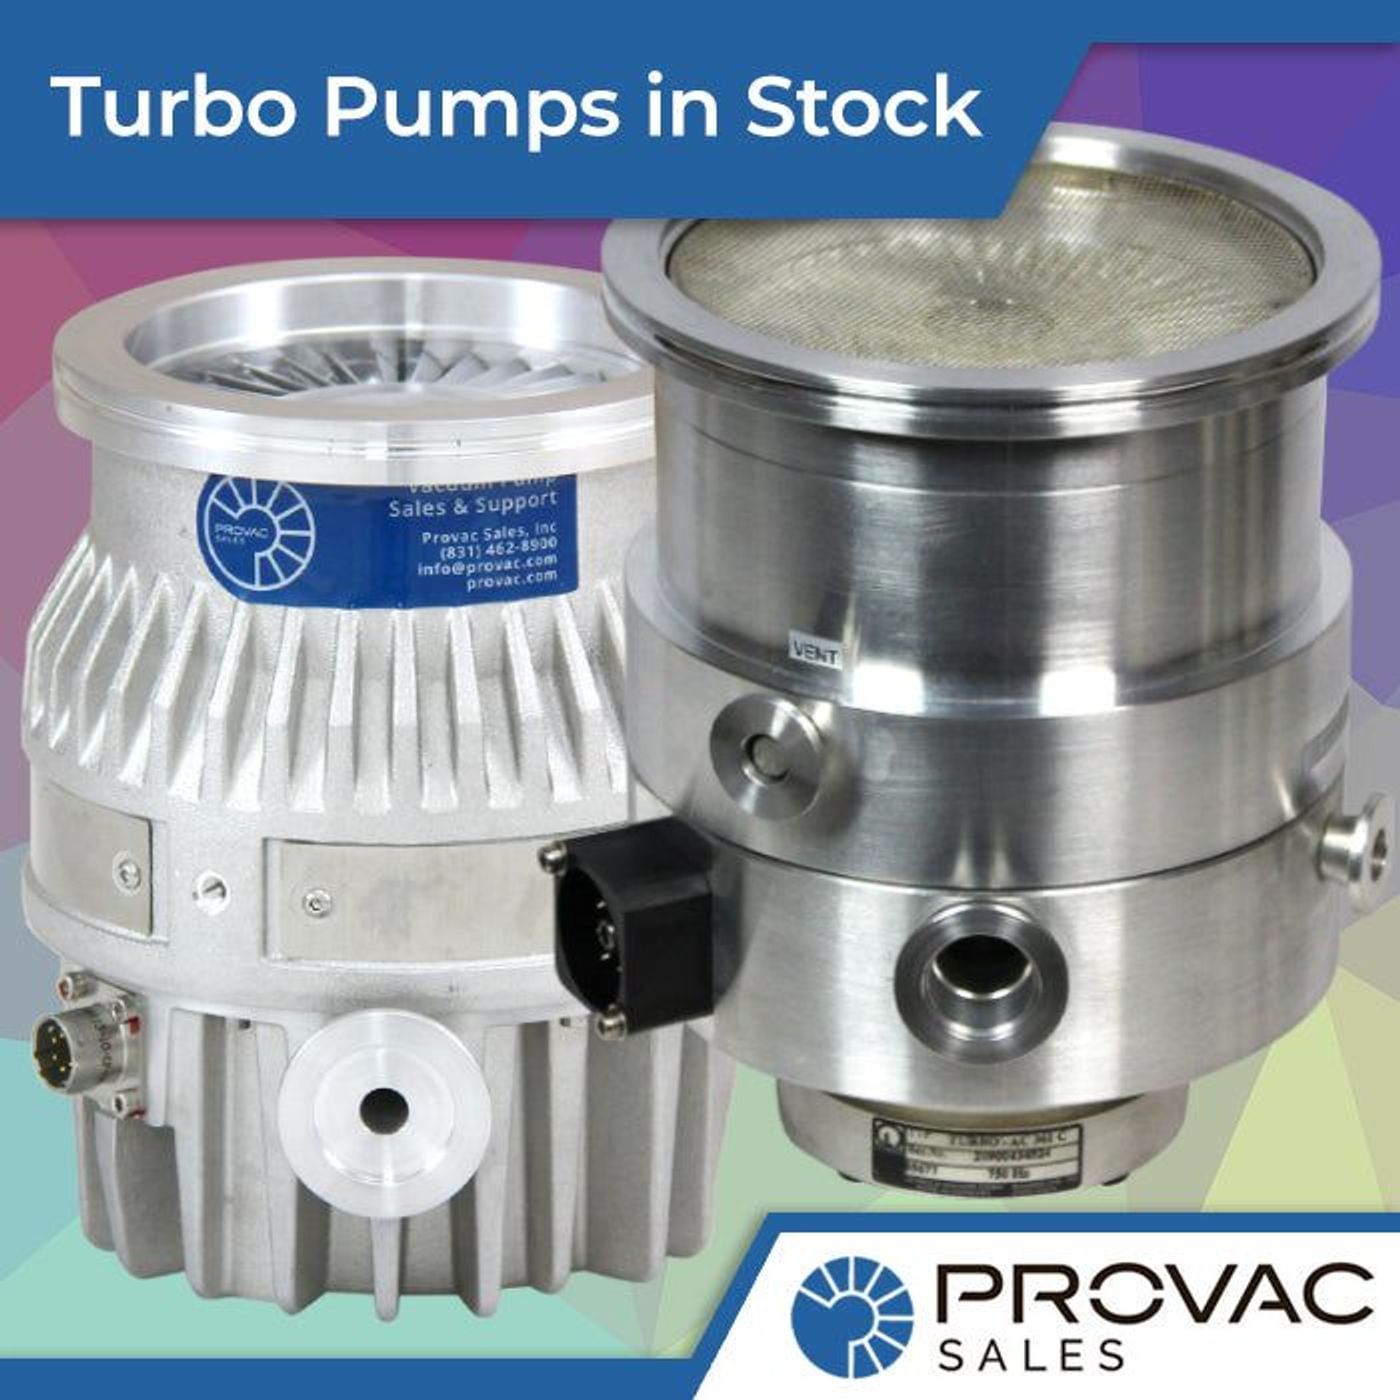 Varian TV-301 & Leybold TMP-361C Turbo Pumps In Stock